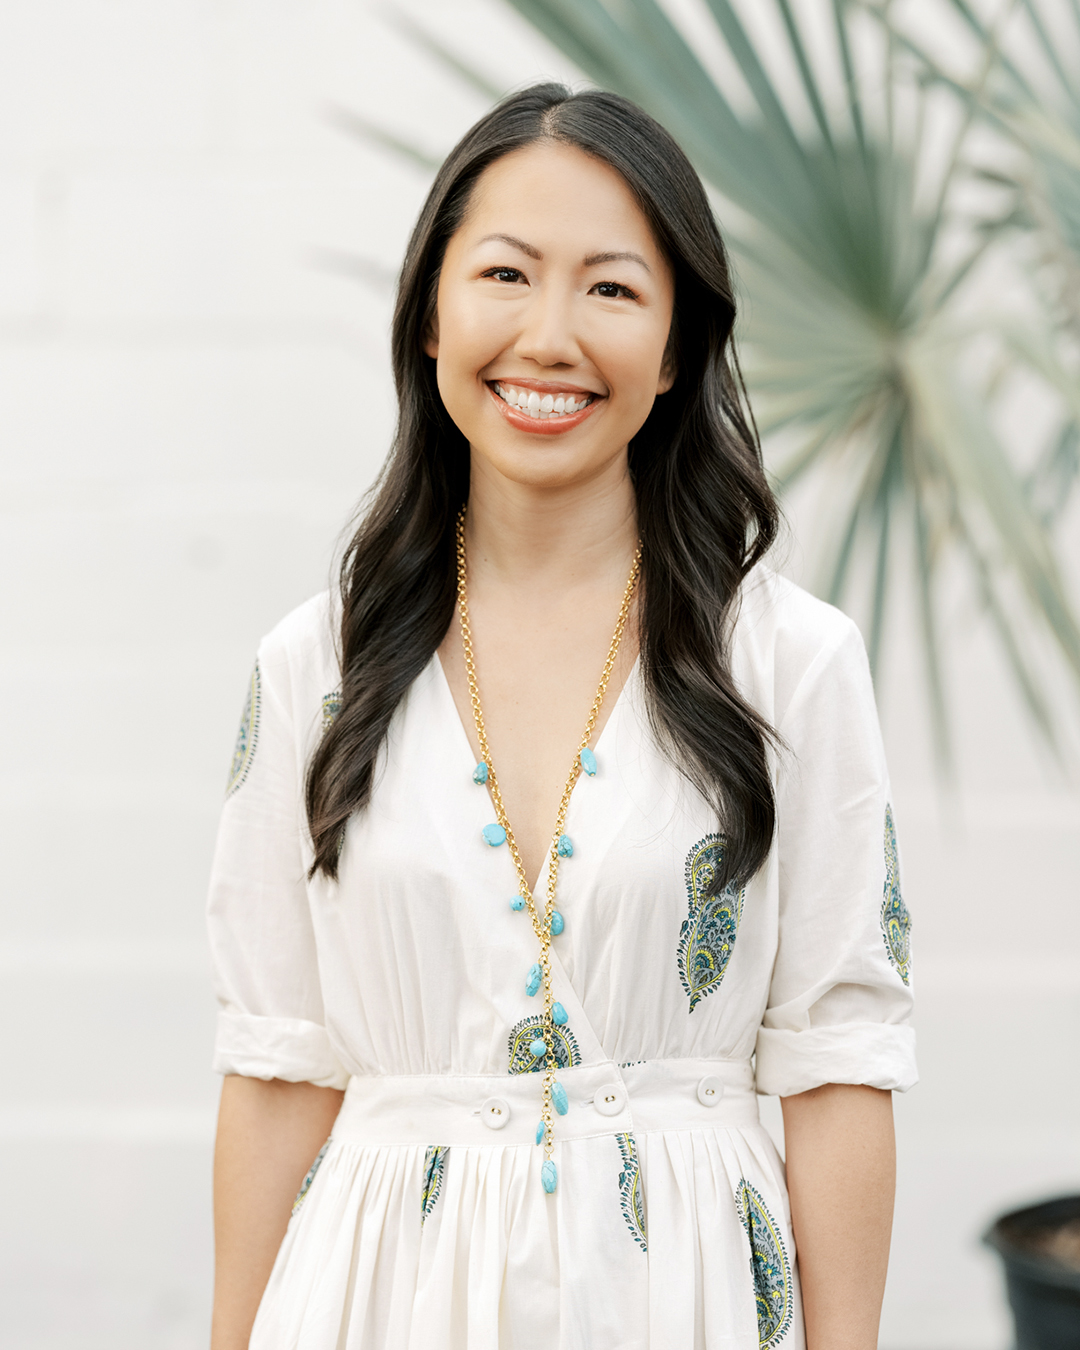 Meditate with Susan Chen